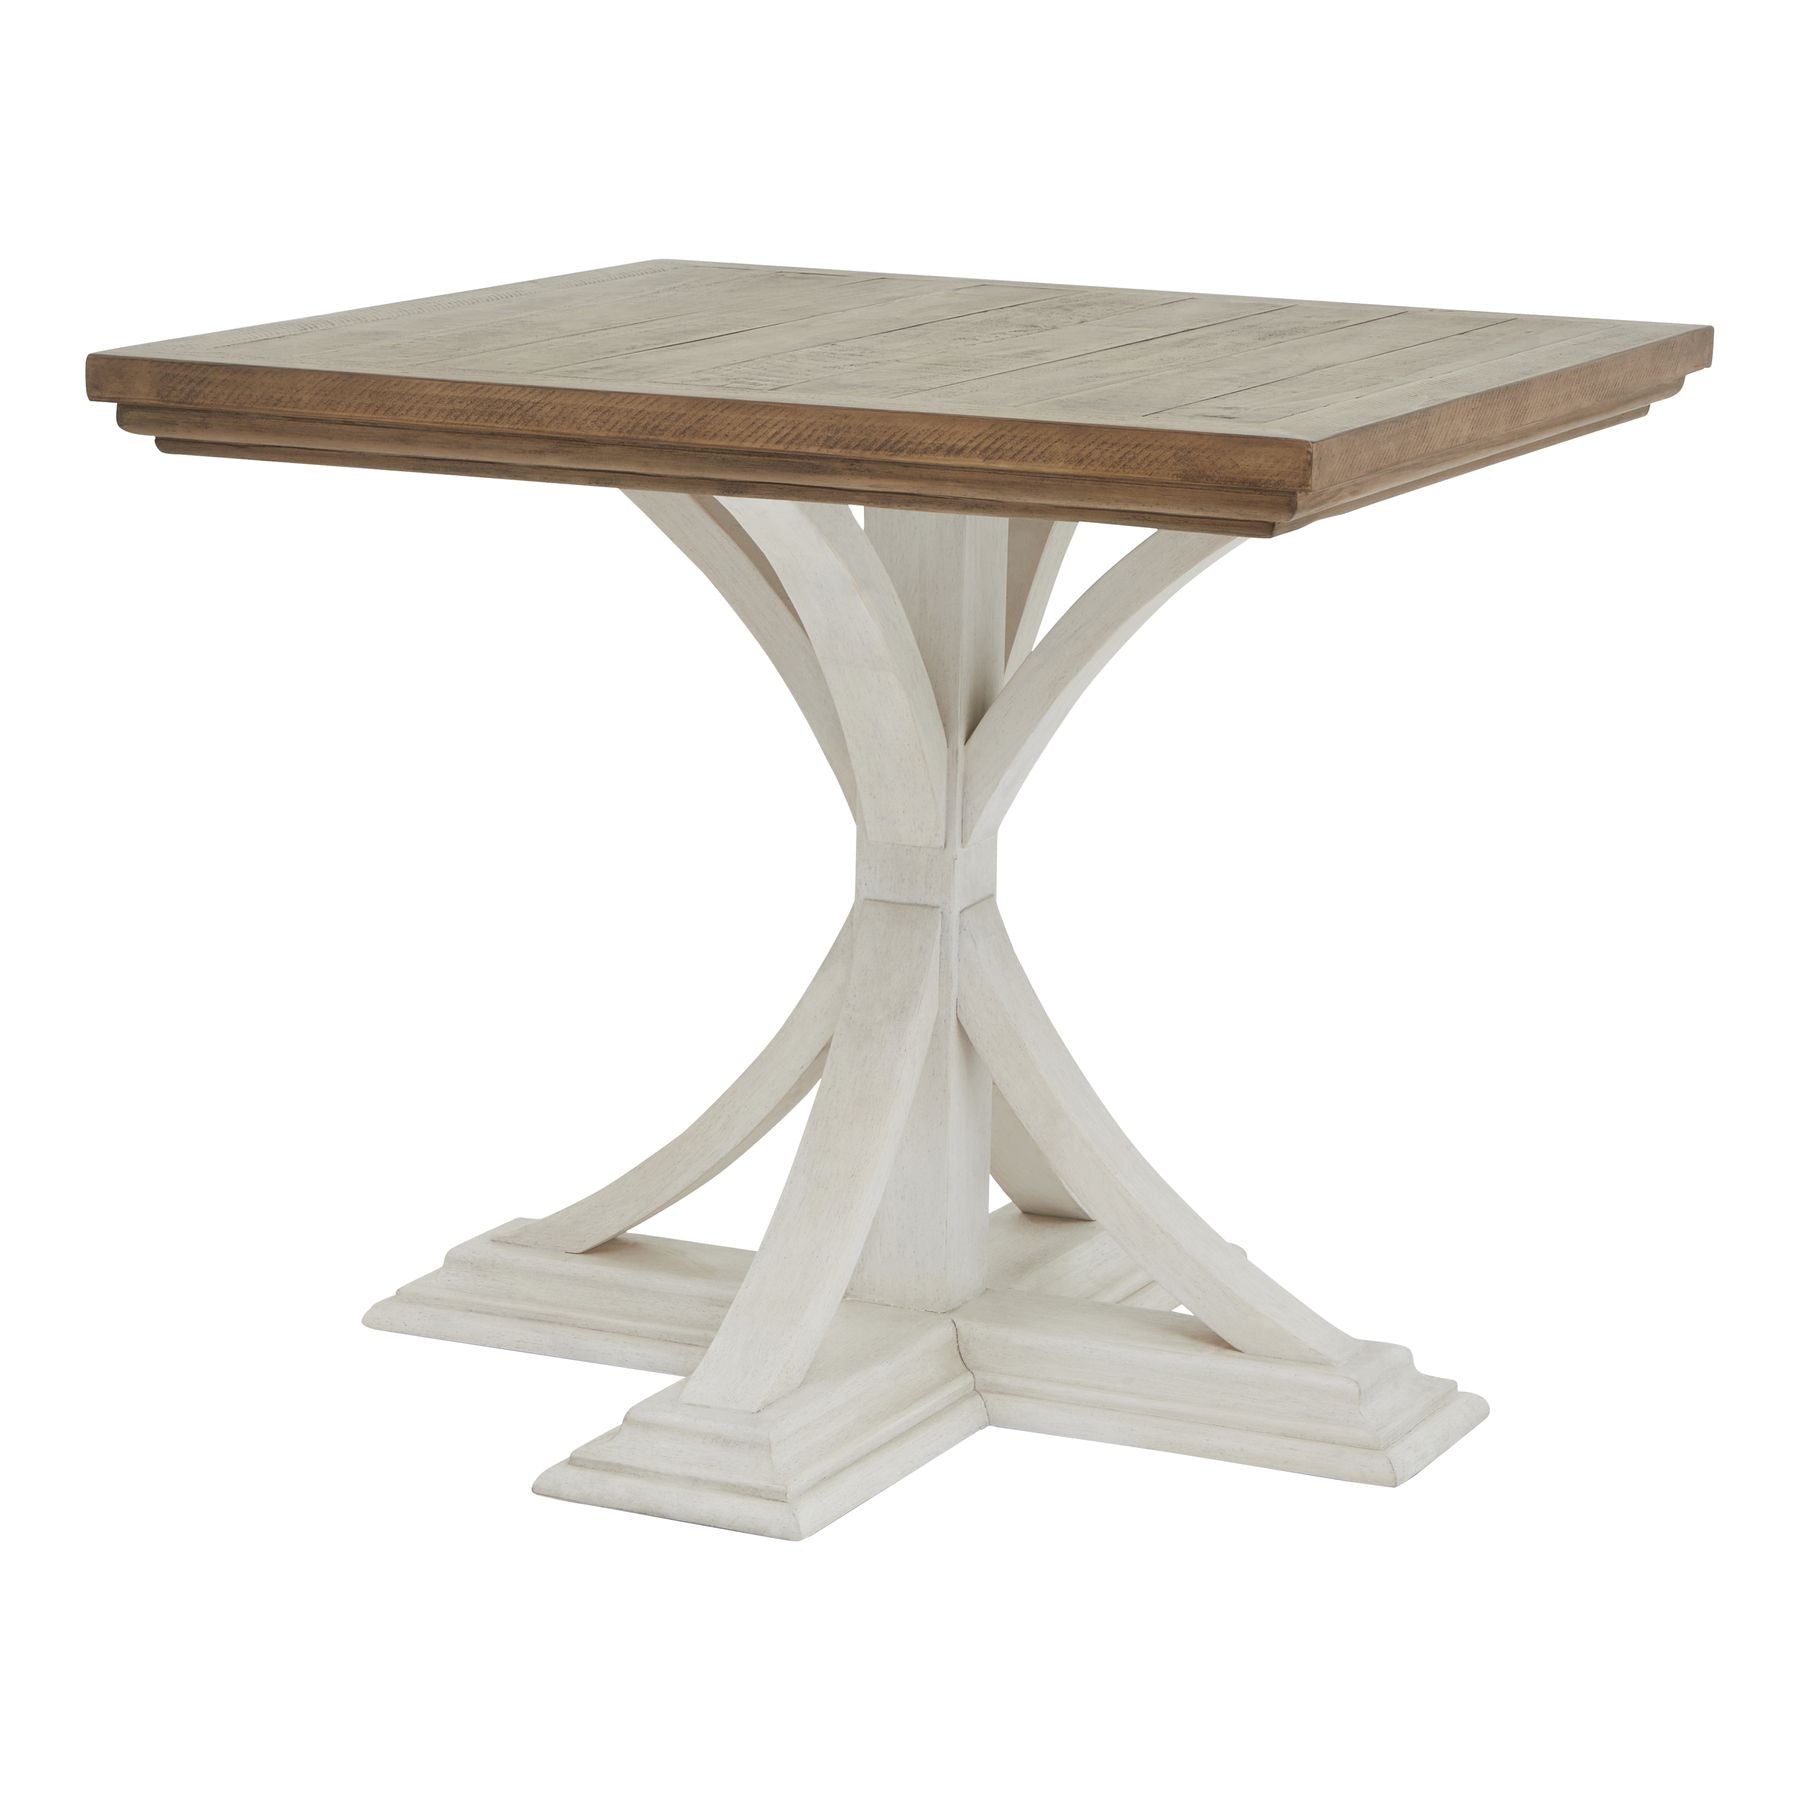 View Luna Collection Square Dining Table information